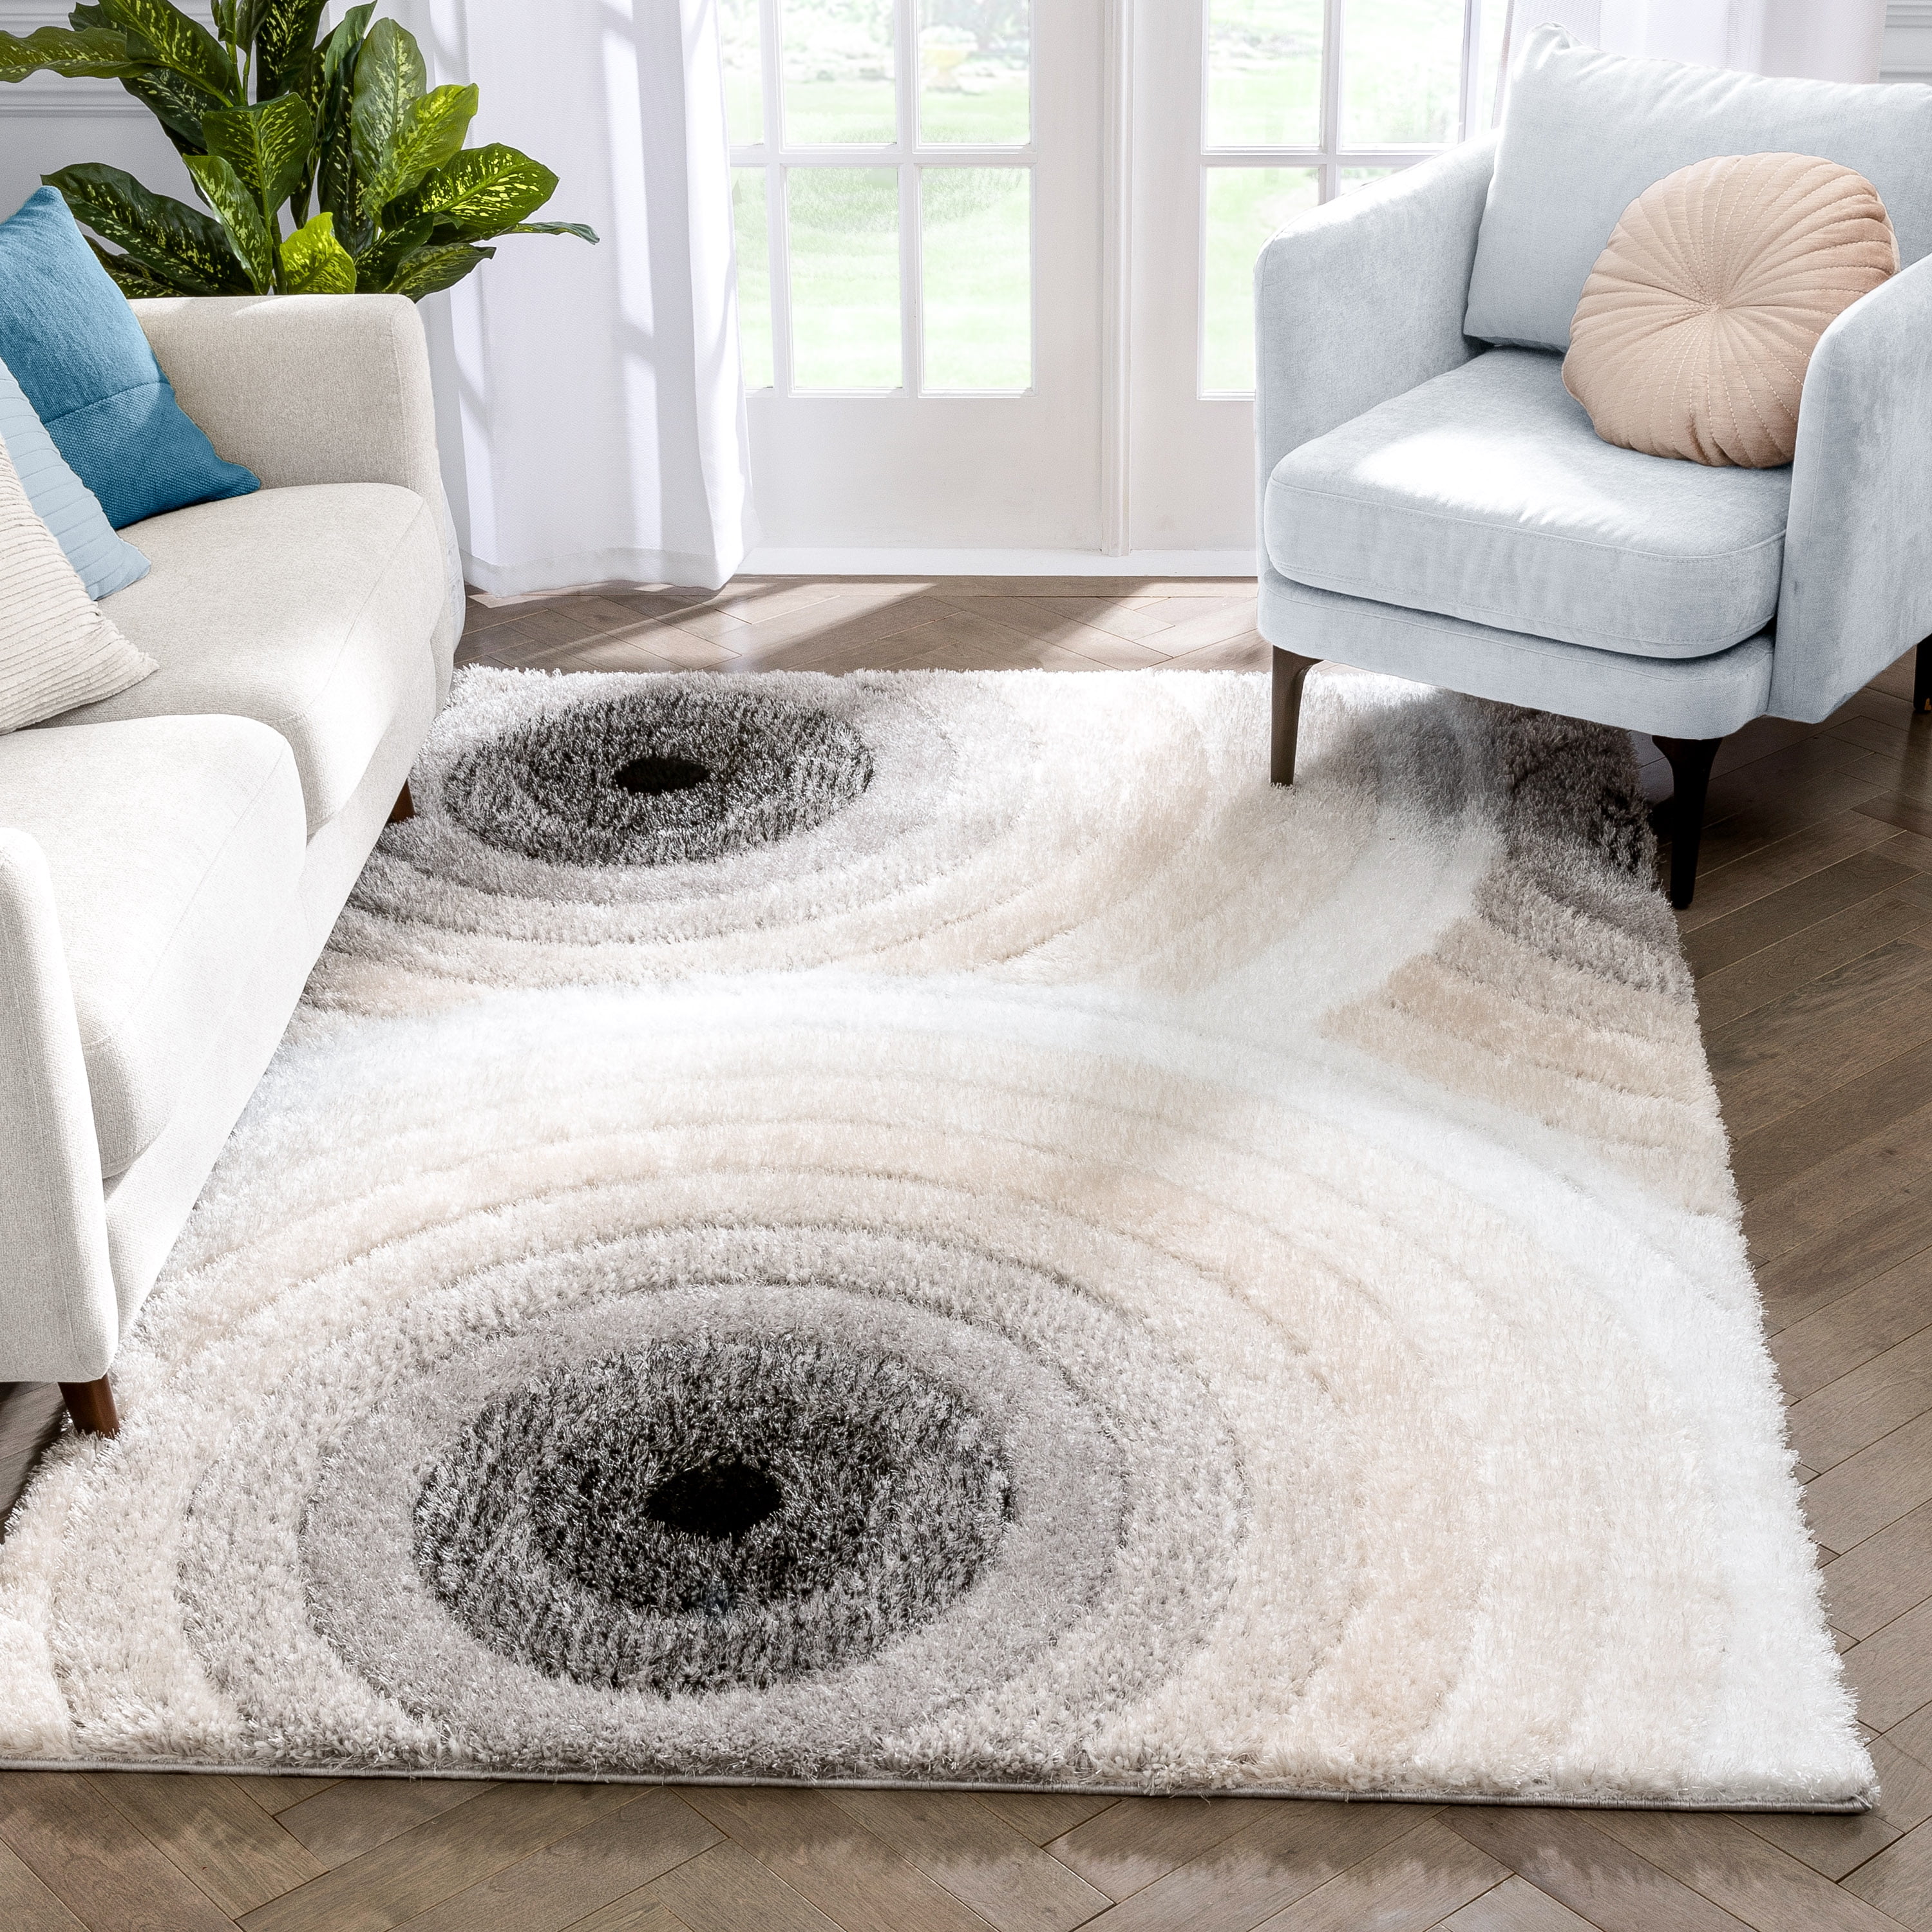 Actual Size Ivory Modern 3x5 Circles Geometric Lines Area Rug 2' 7" x 4' 2" 